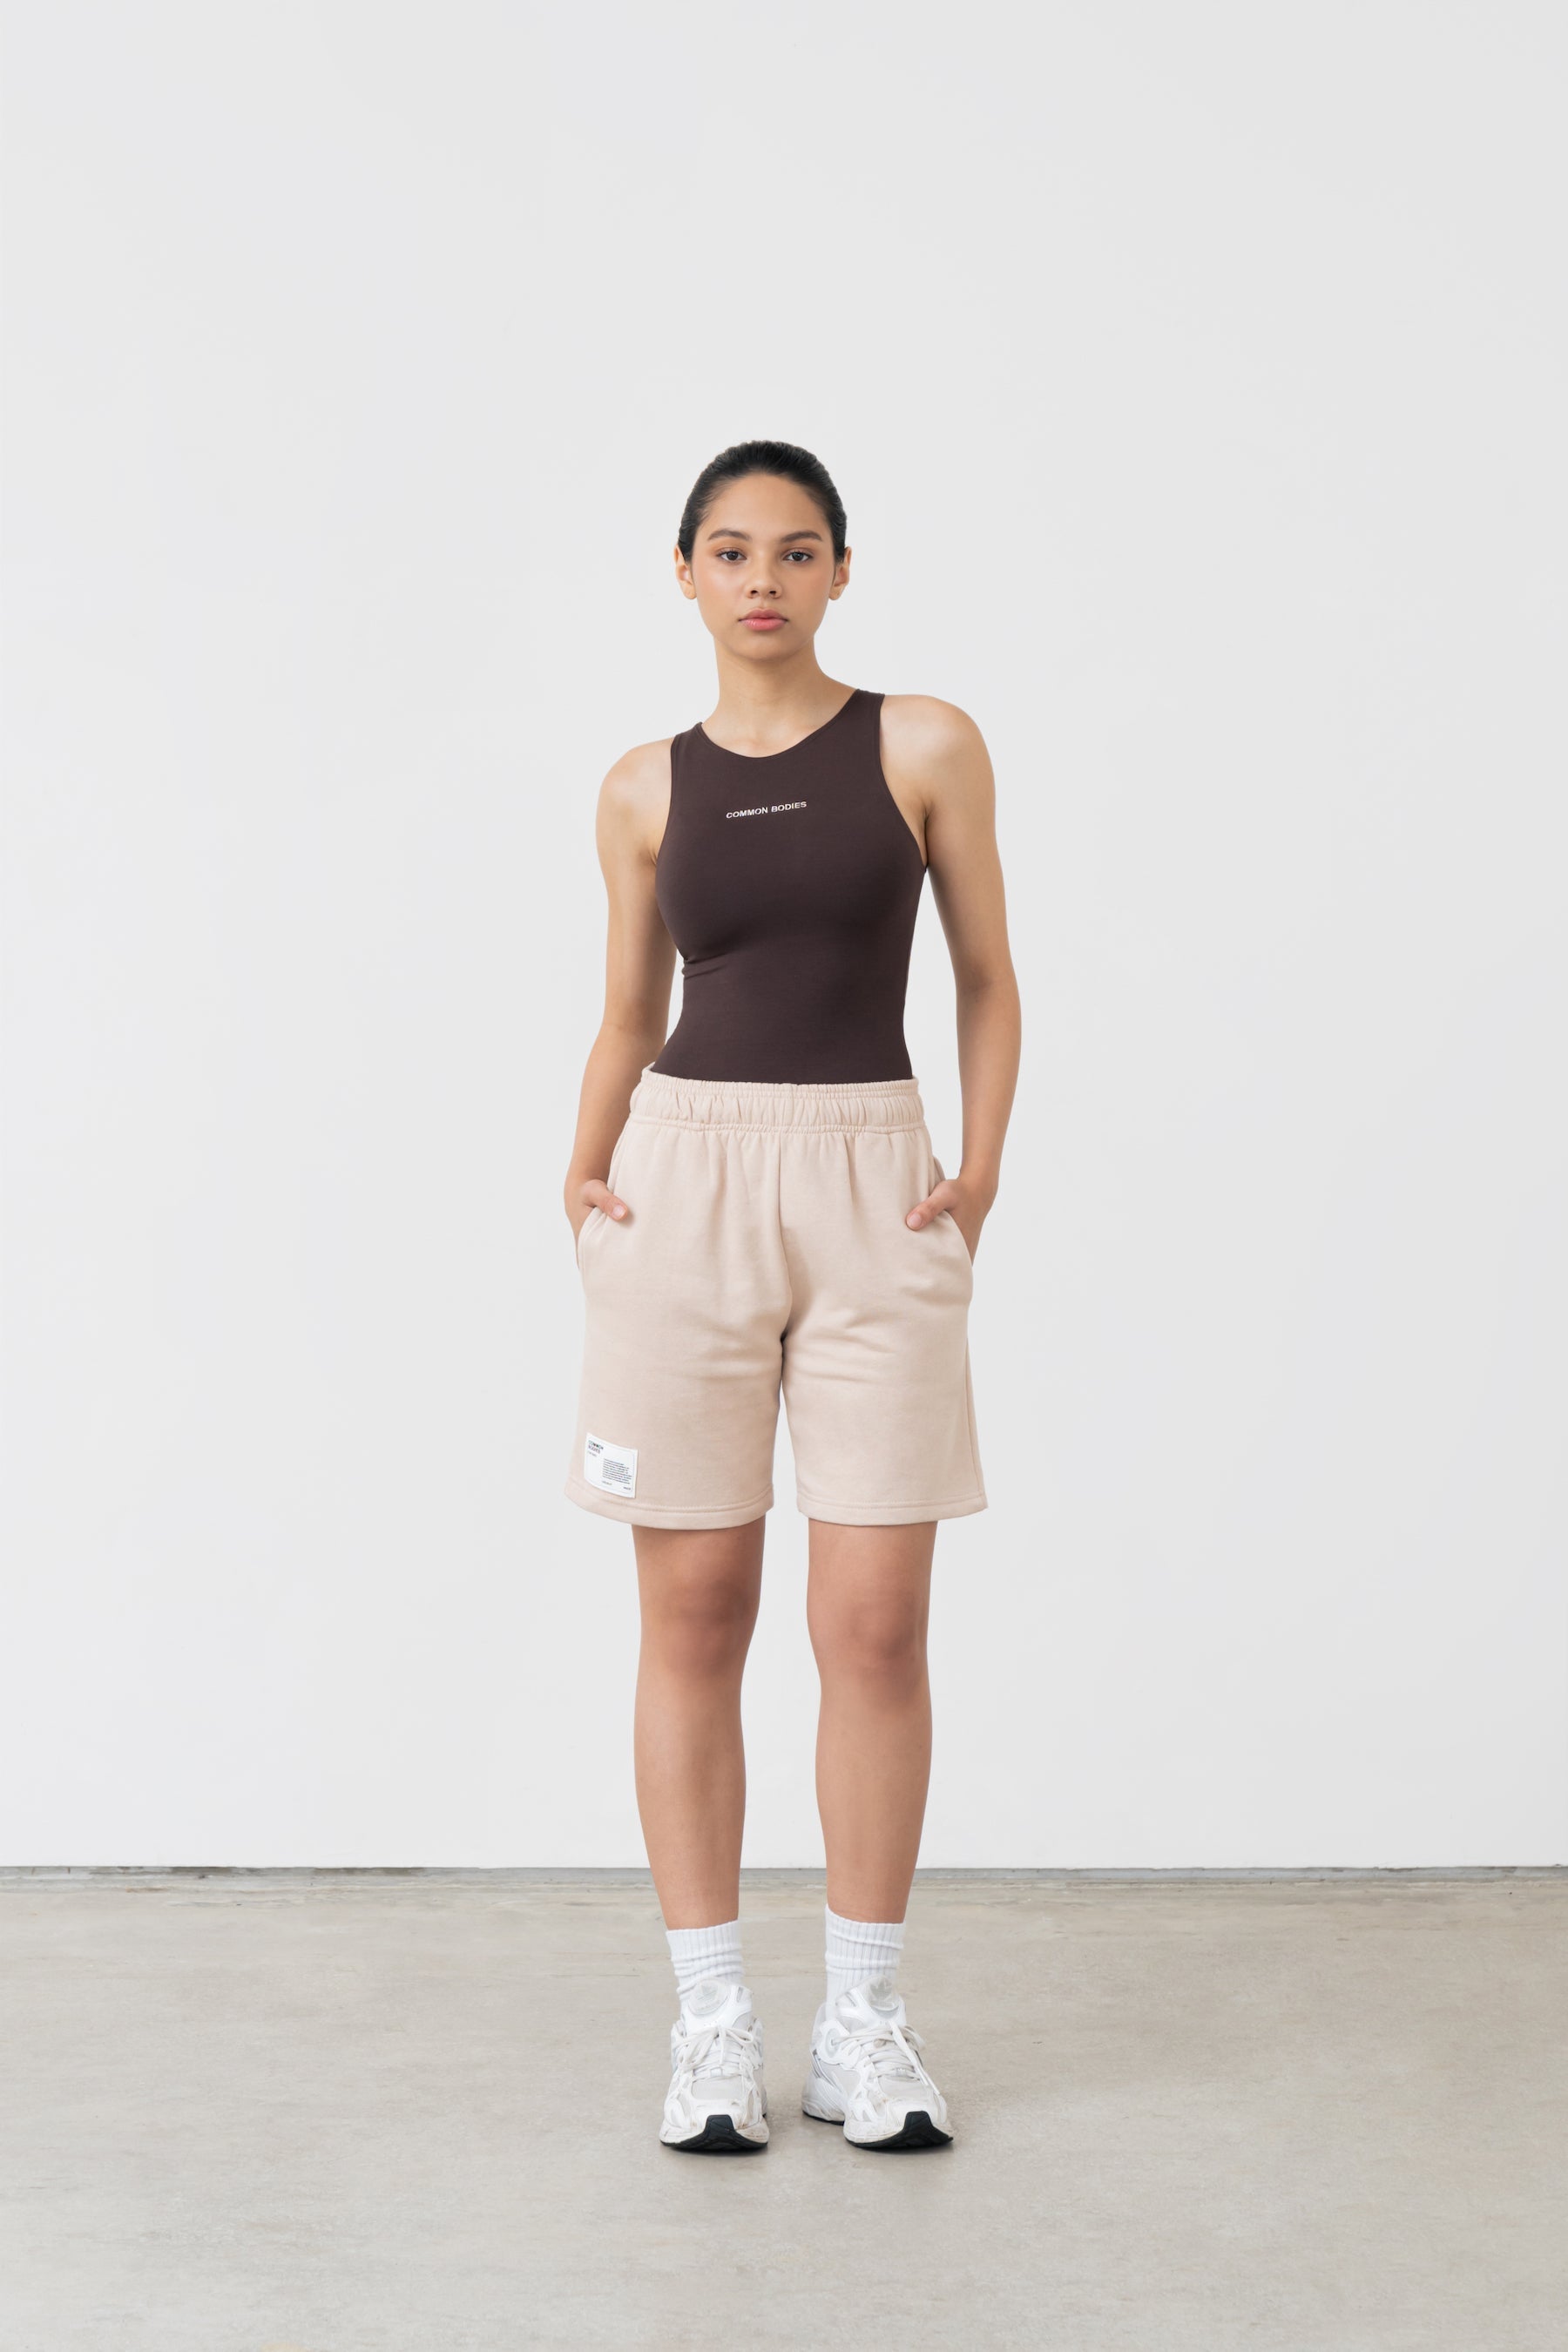 Frequency Shorts in Latte (Unisex)